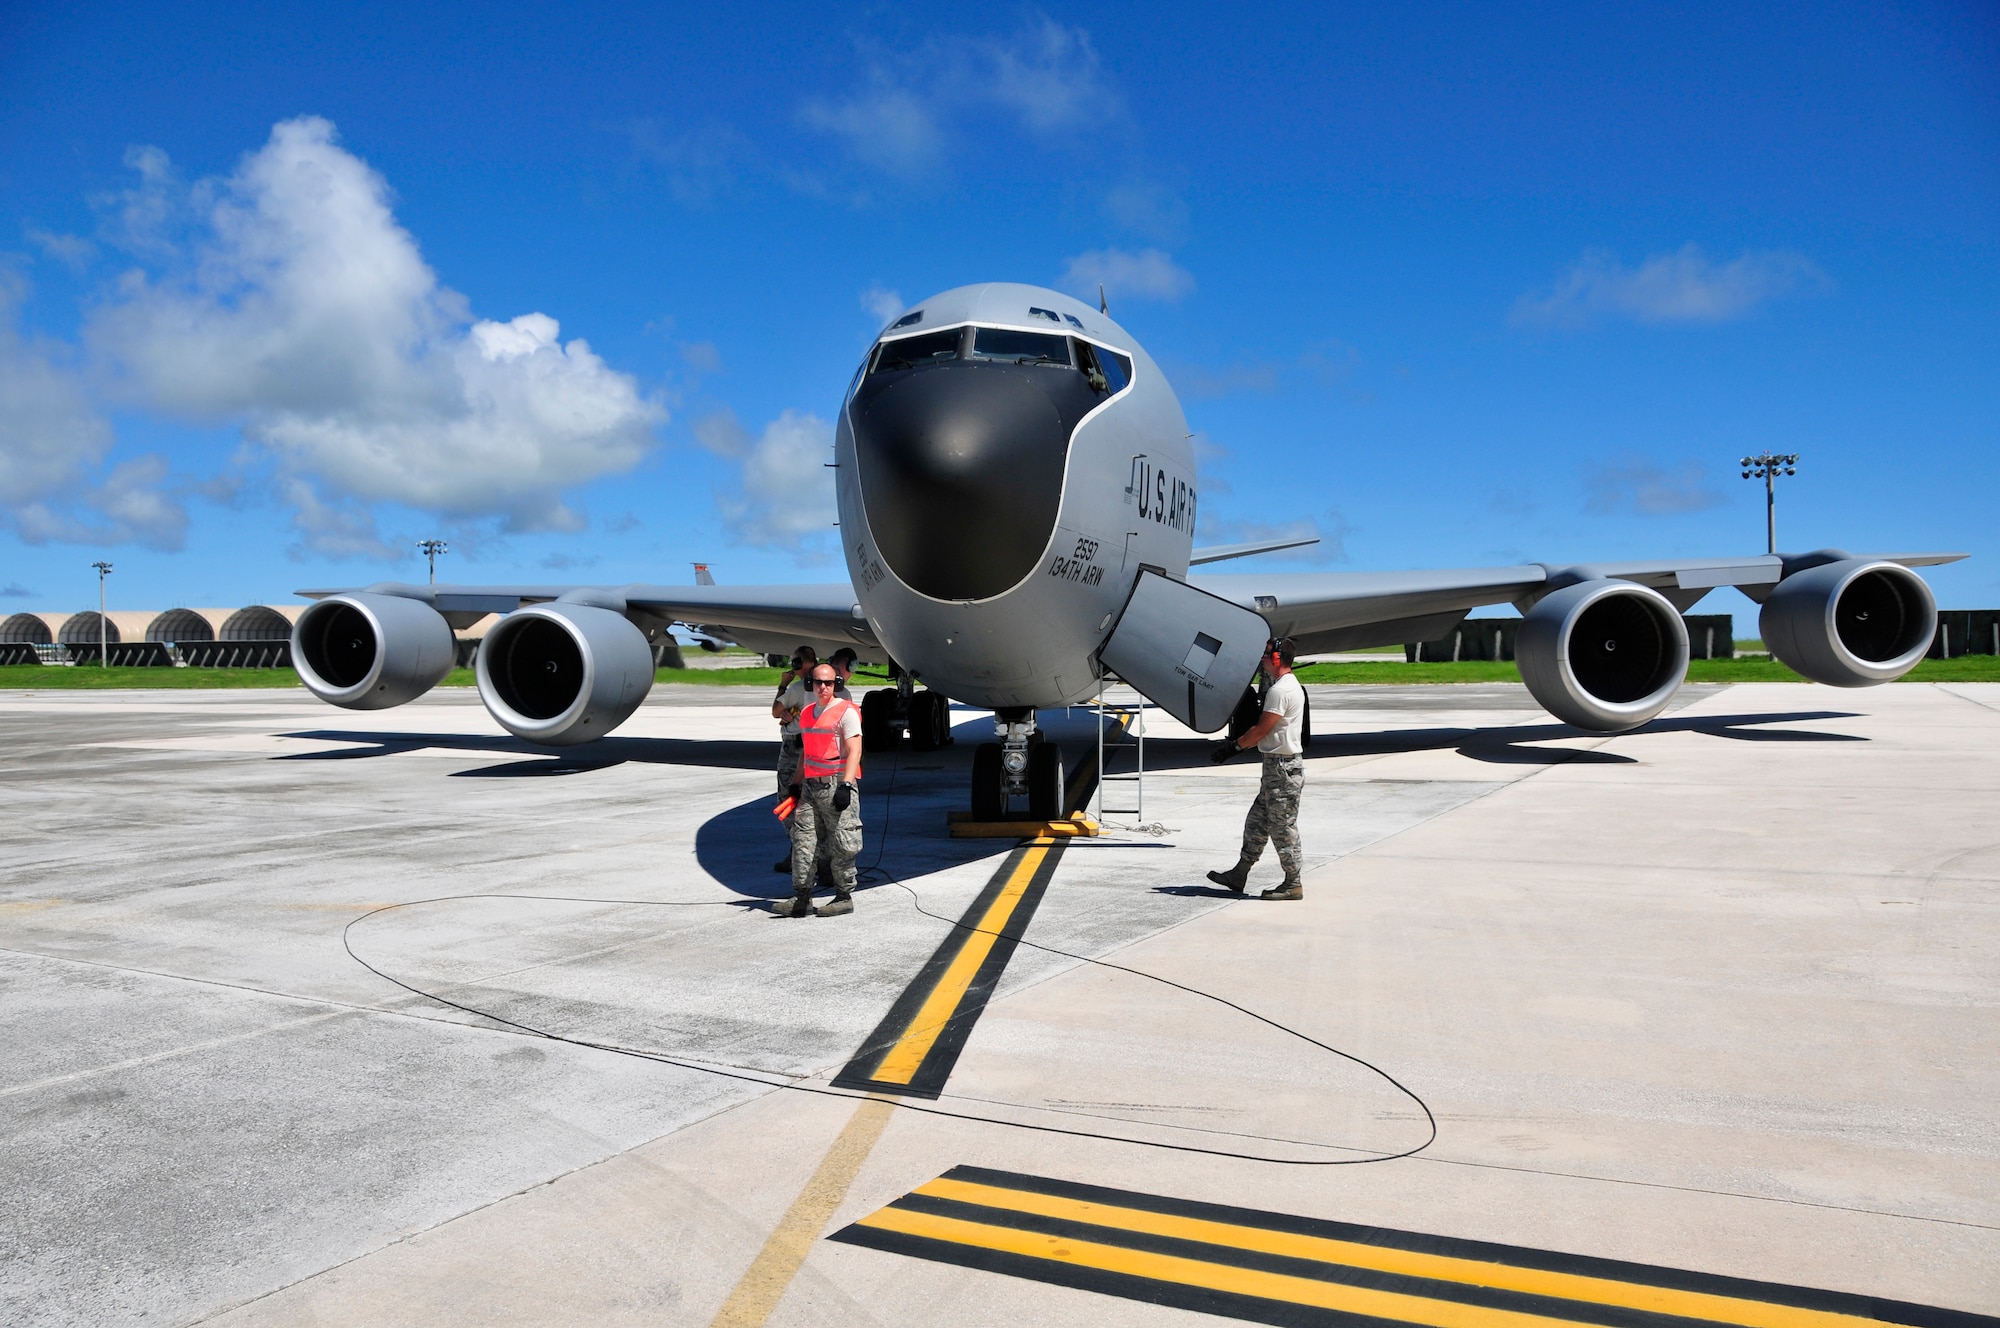 Members of the 134th Air Refueling Wing from McGhee Tyson ANG Base, TN maintain a KC-135R Stratotanker during a training mission at Andersen AFB, Guam.  (U.S. Air National Guard photo by Staff Sgt. Ben Mellon, 134 ARW Public Affairs)